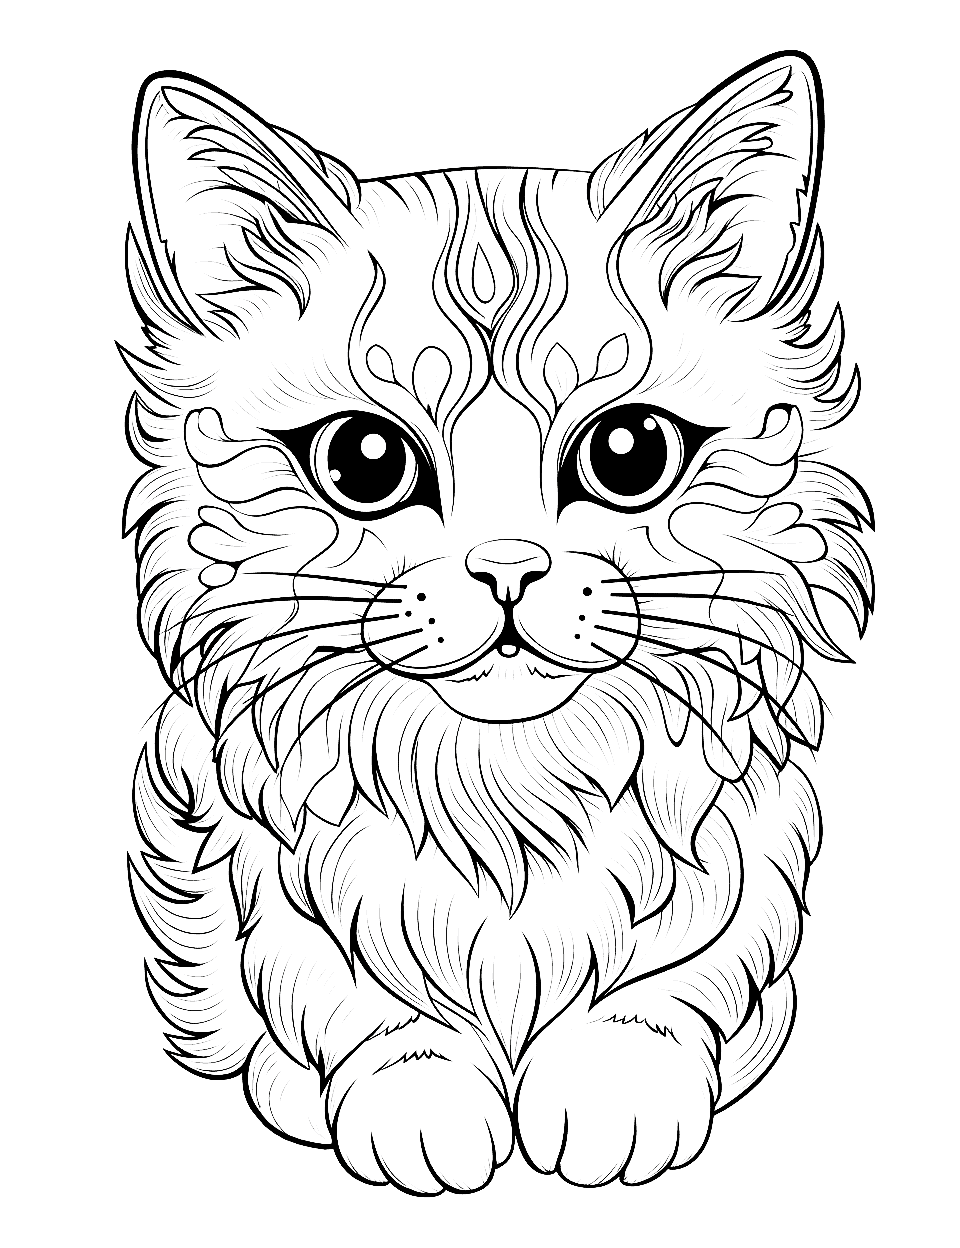 Detailed Kitten Portrait Coloring Page - A close-up portrait of a kitten with intricate fur patterns to color.